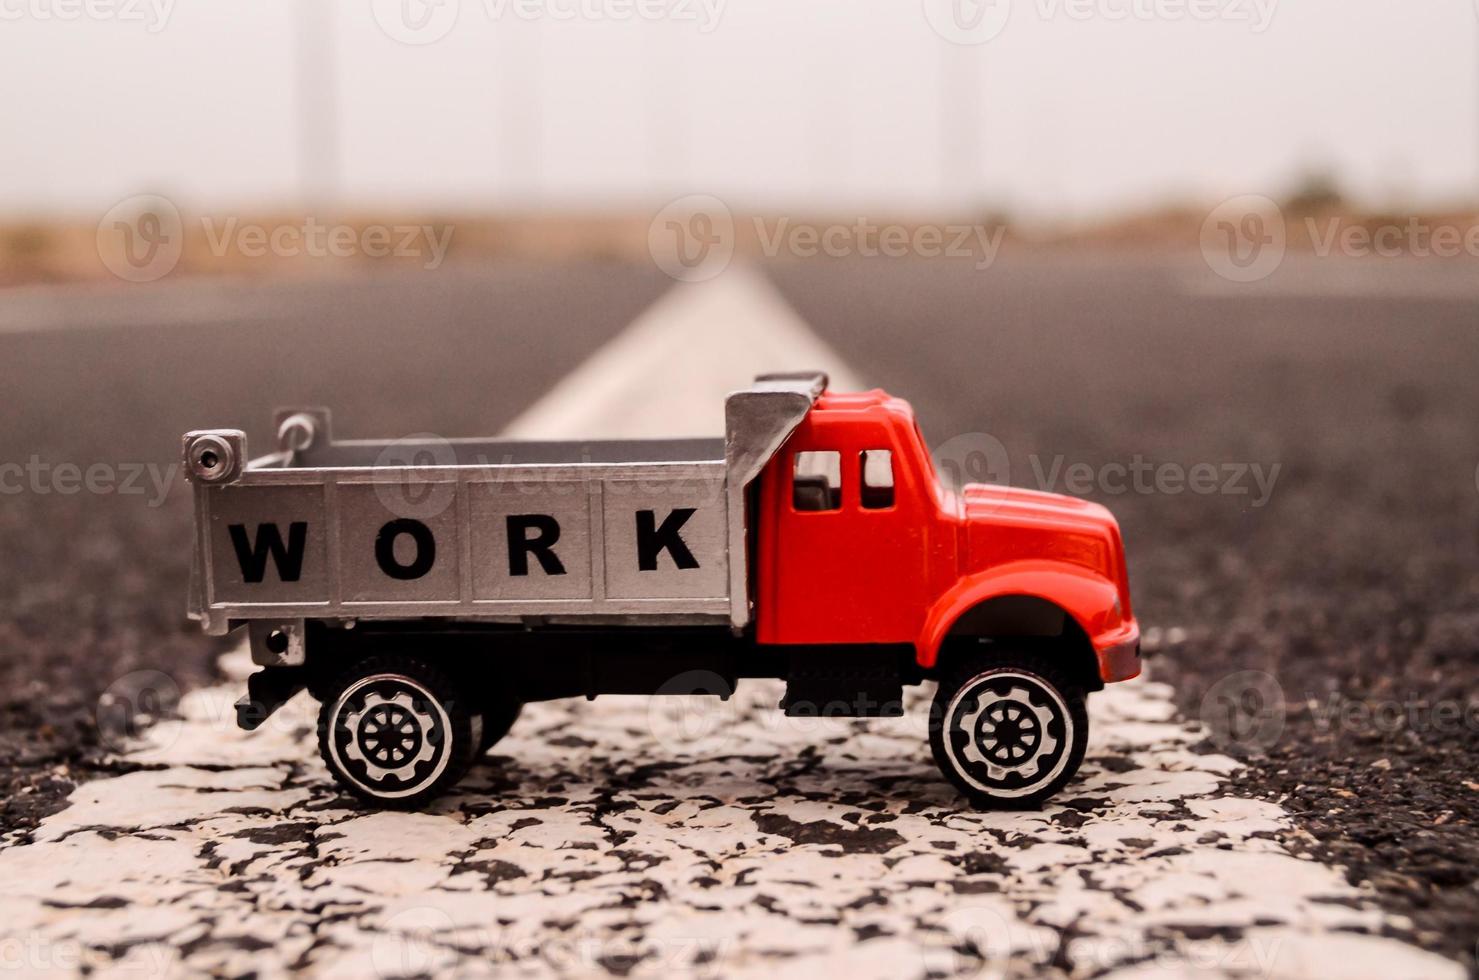 Toy truck on the road photo